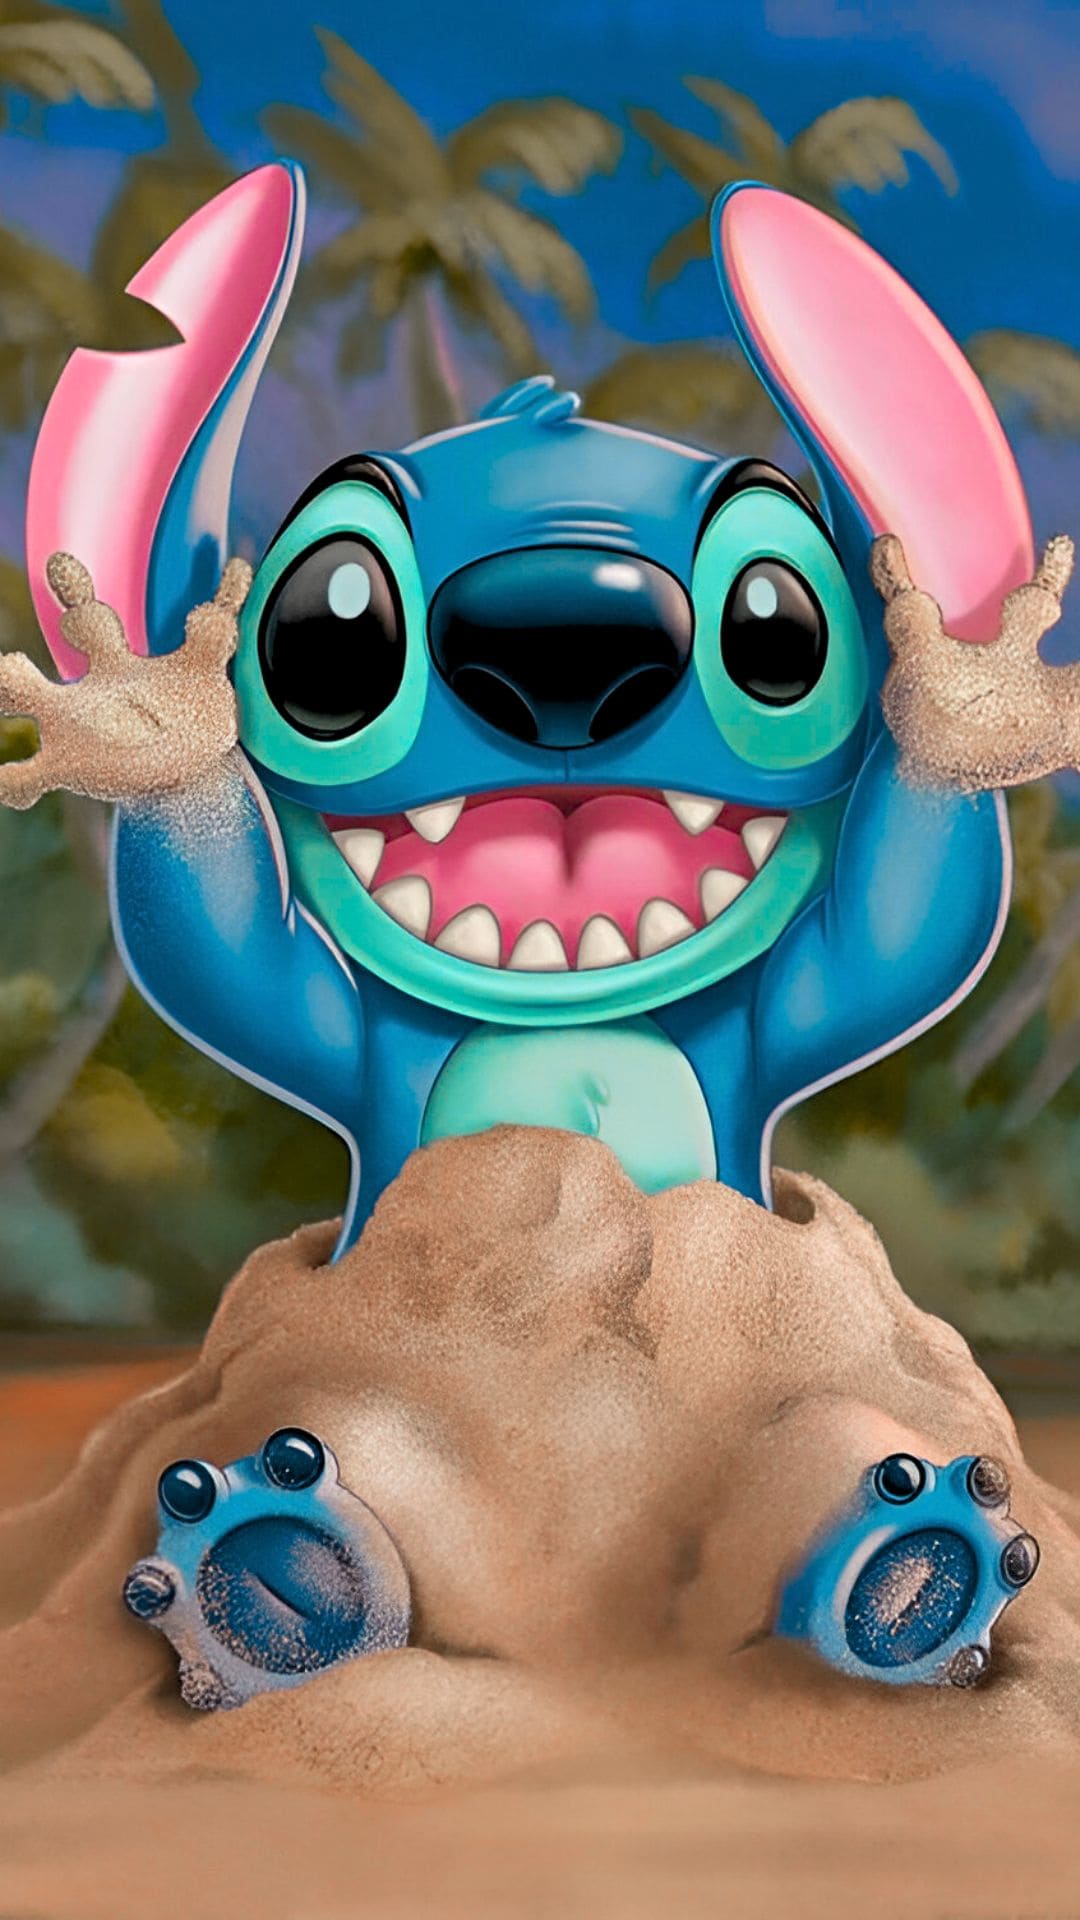 Stitch Wallpaper For Phone